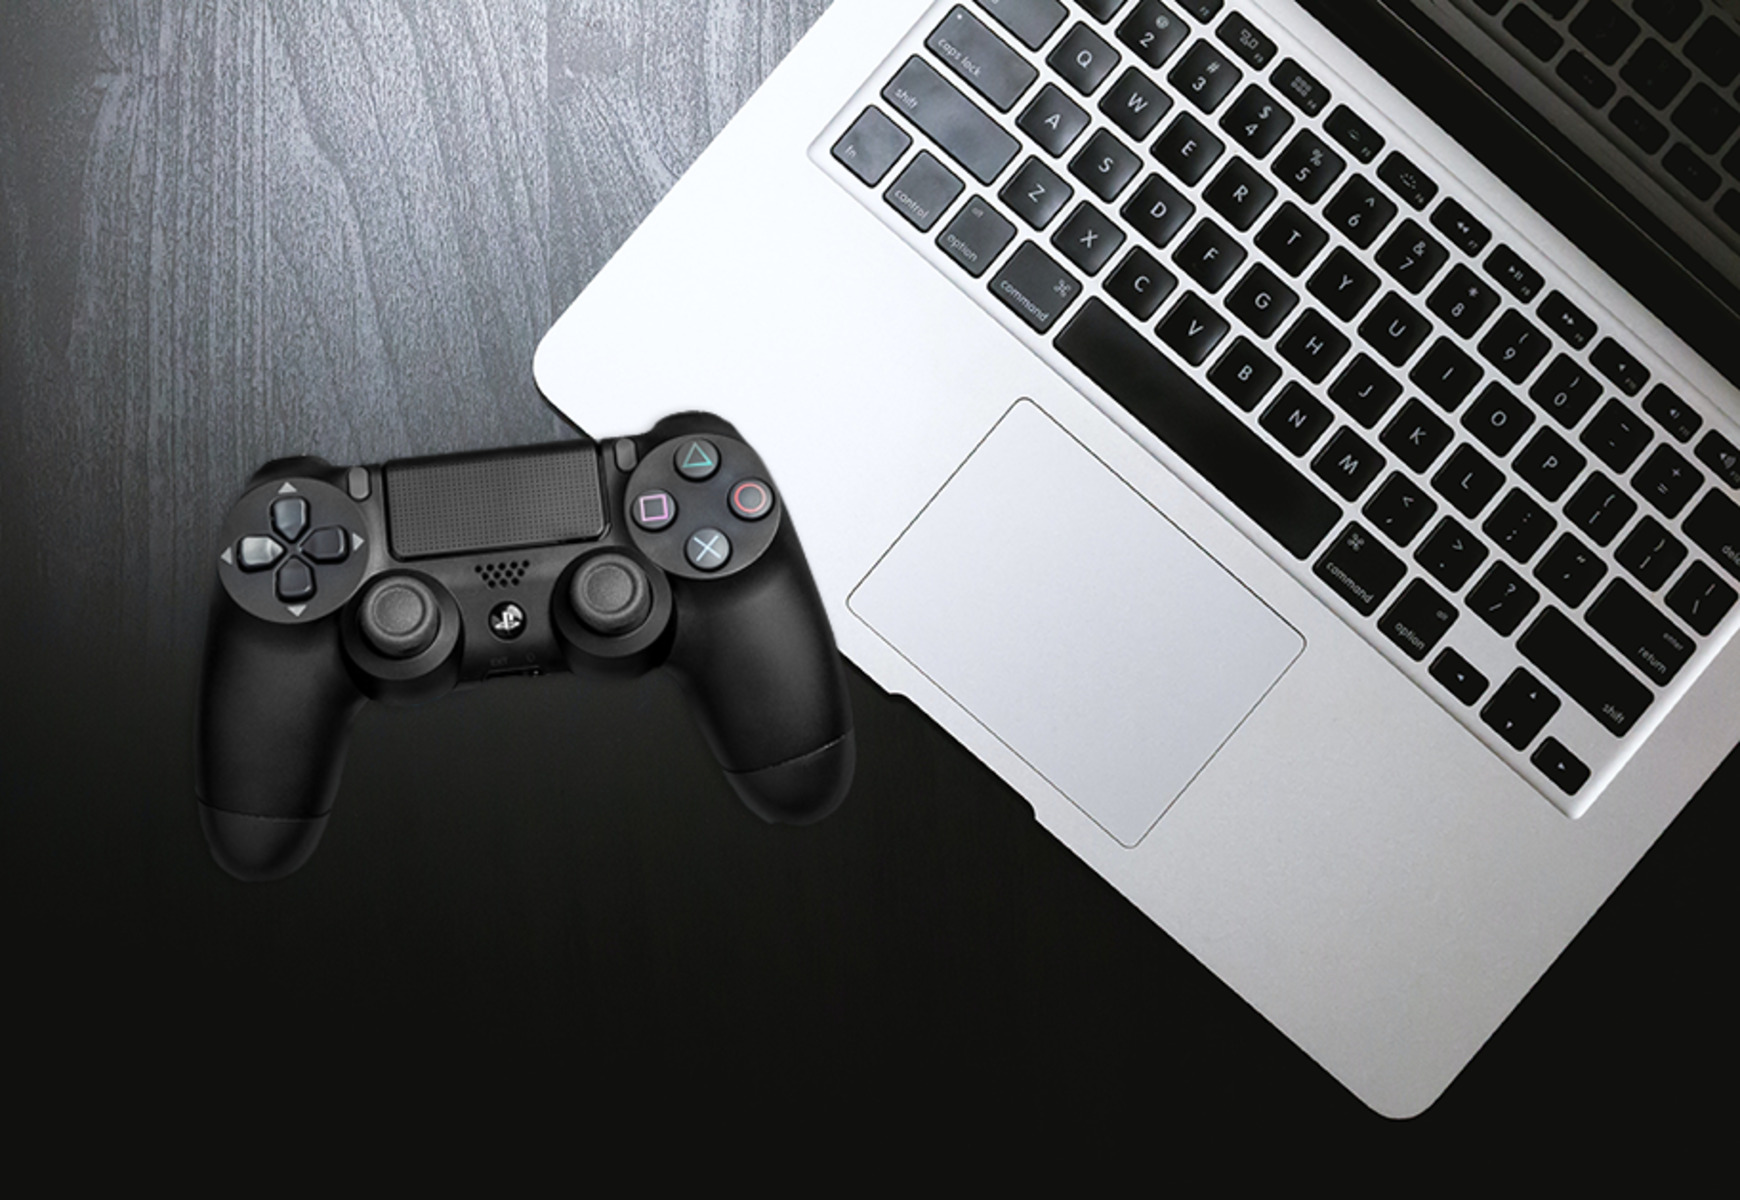 How To Play PS4 On Chromebook With HDMI